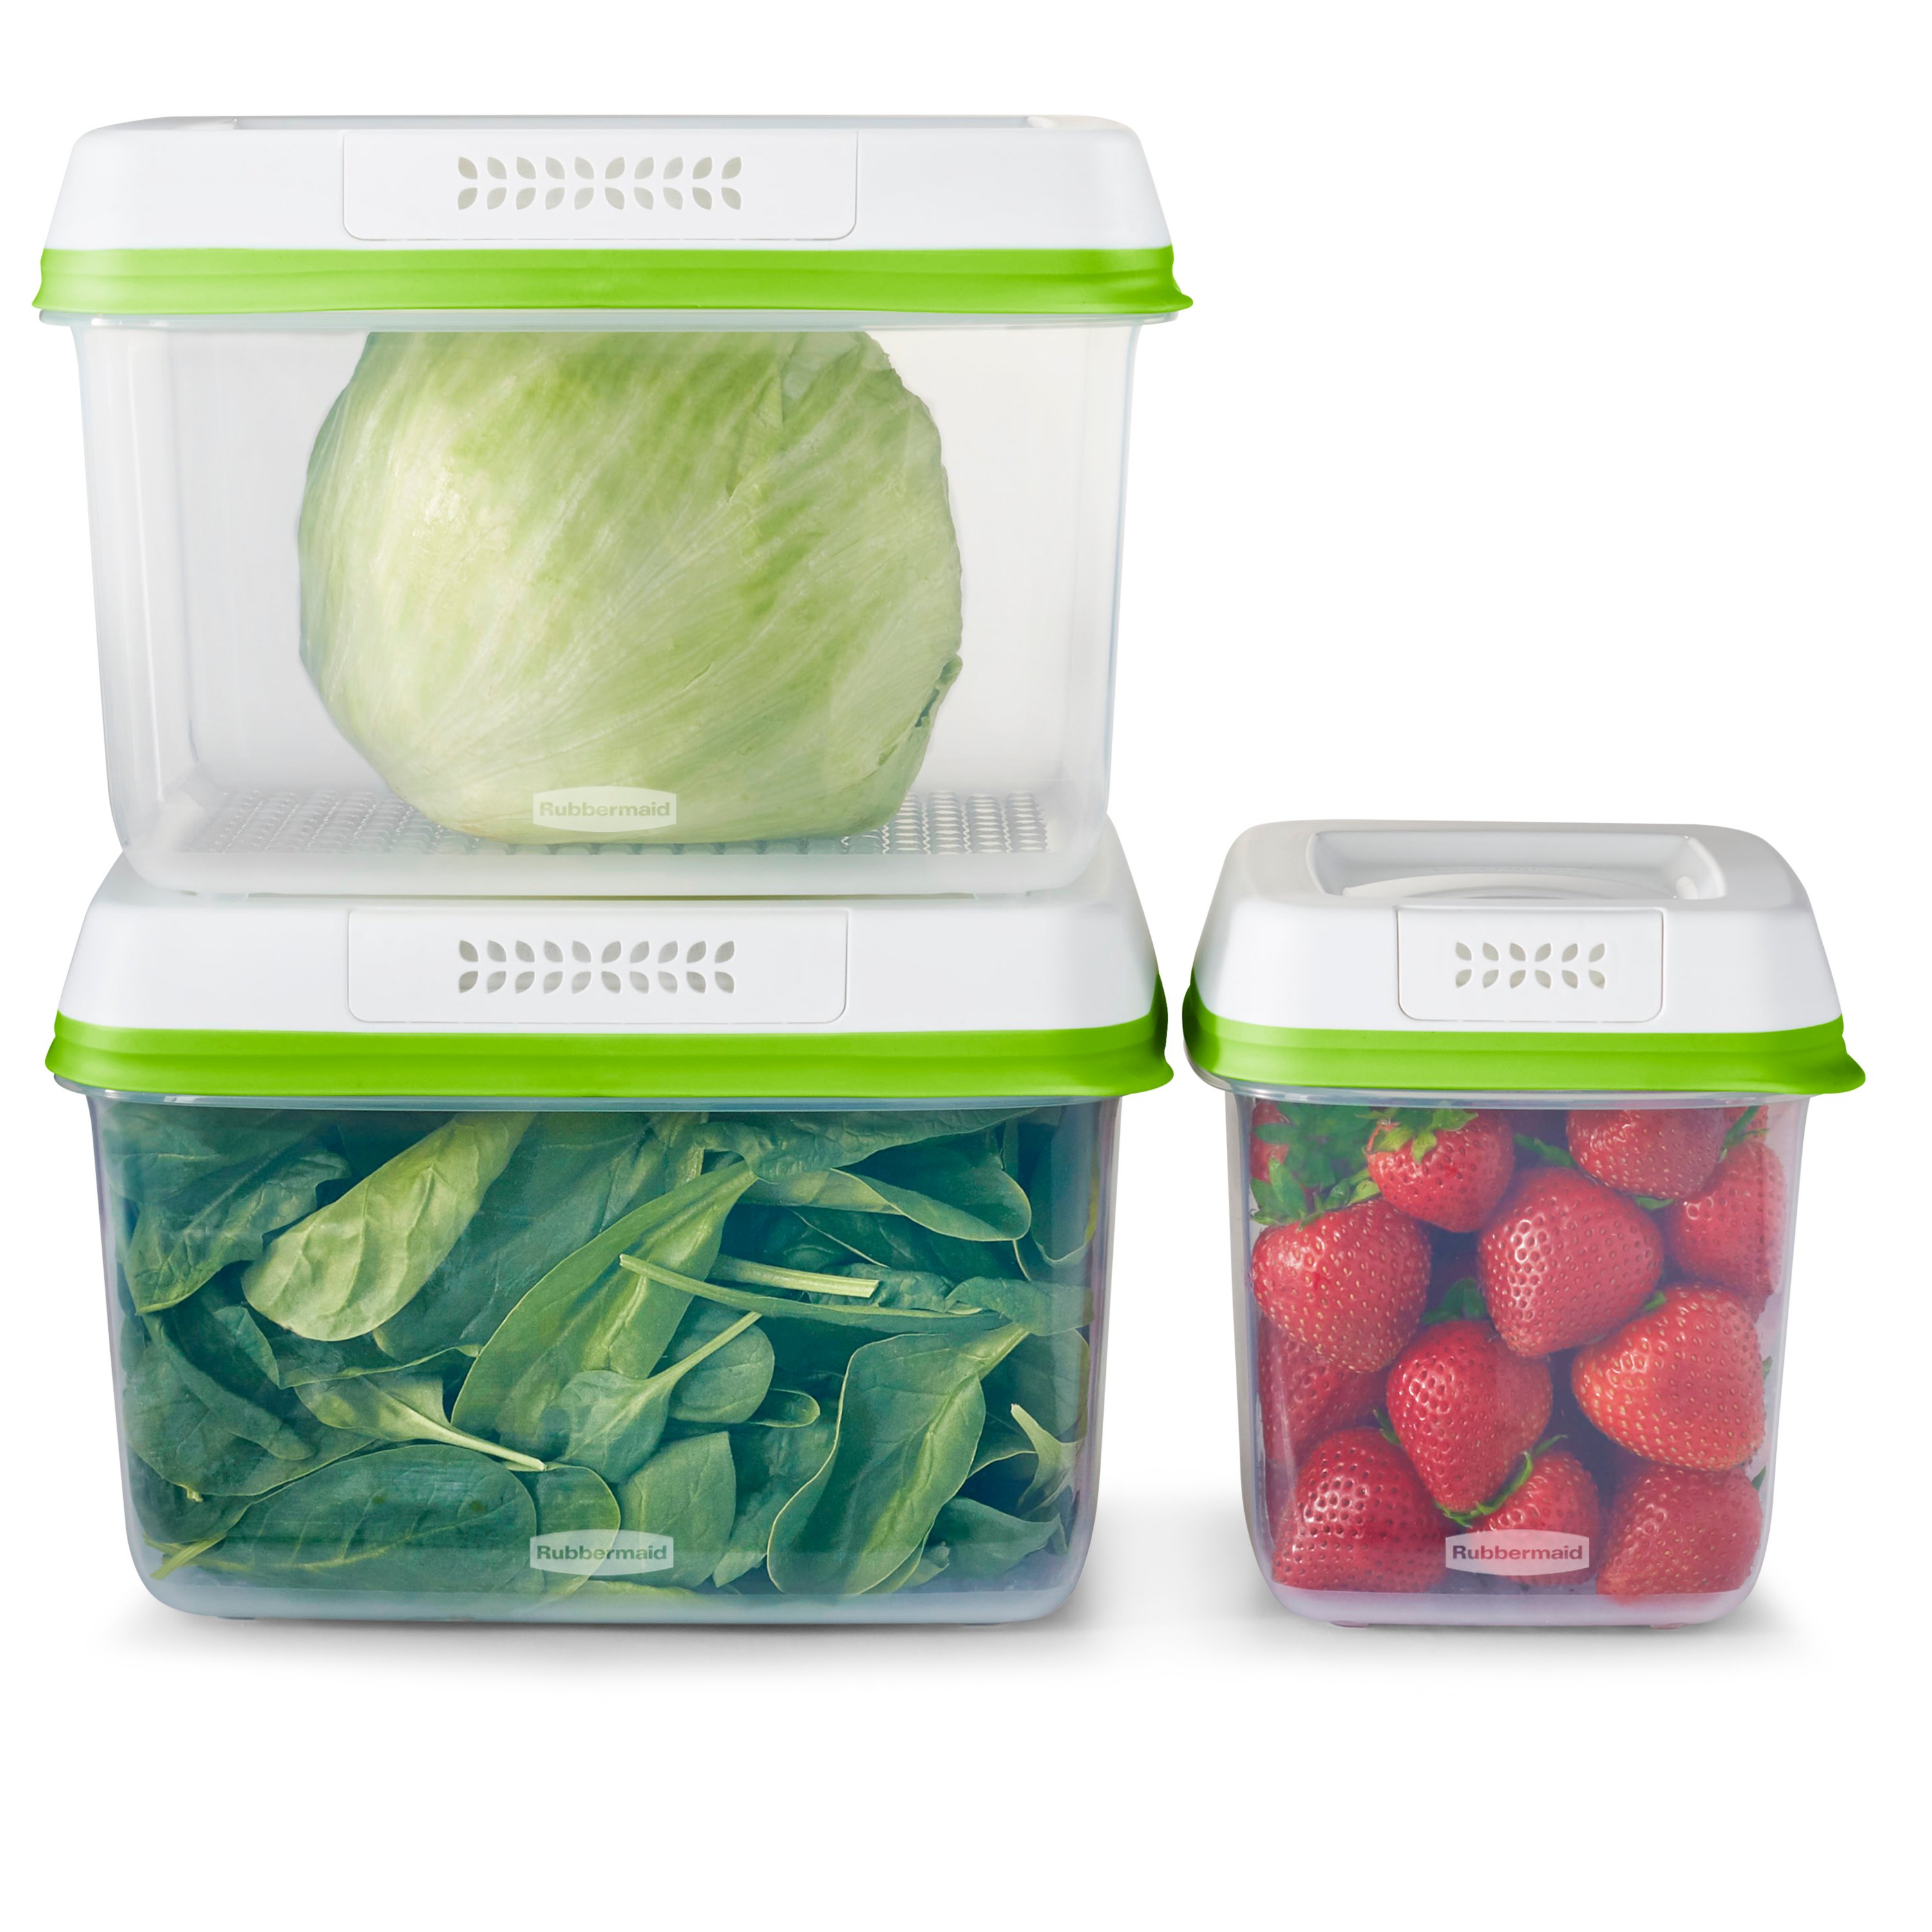 My Candid Canvas: Rubbermaid® FreshWorks™ Produce Savers Truly Saved My  Produce